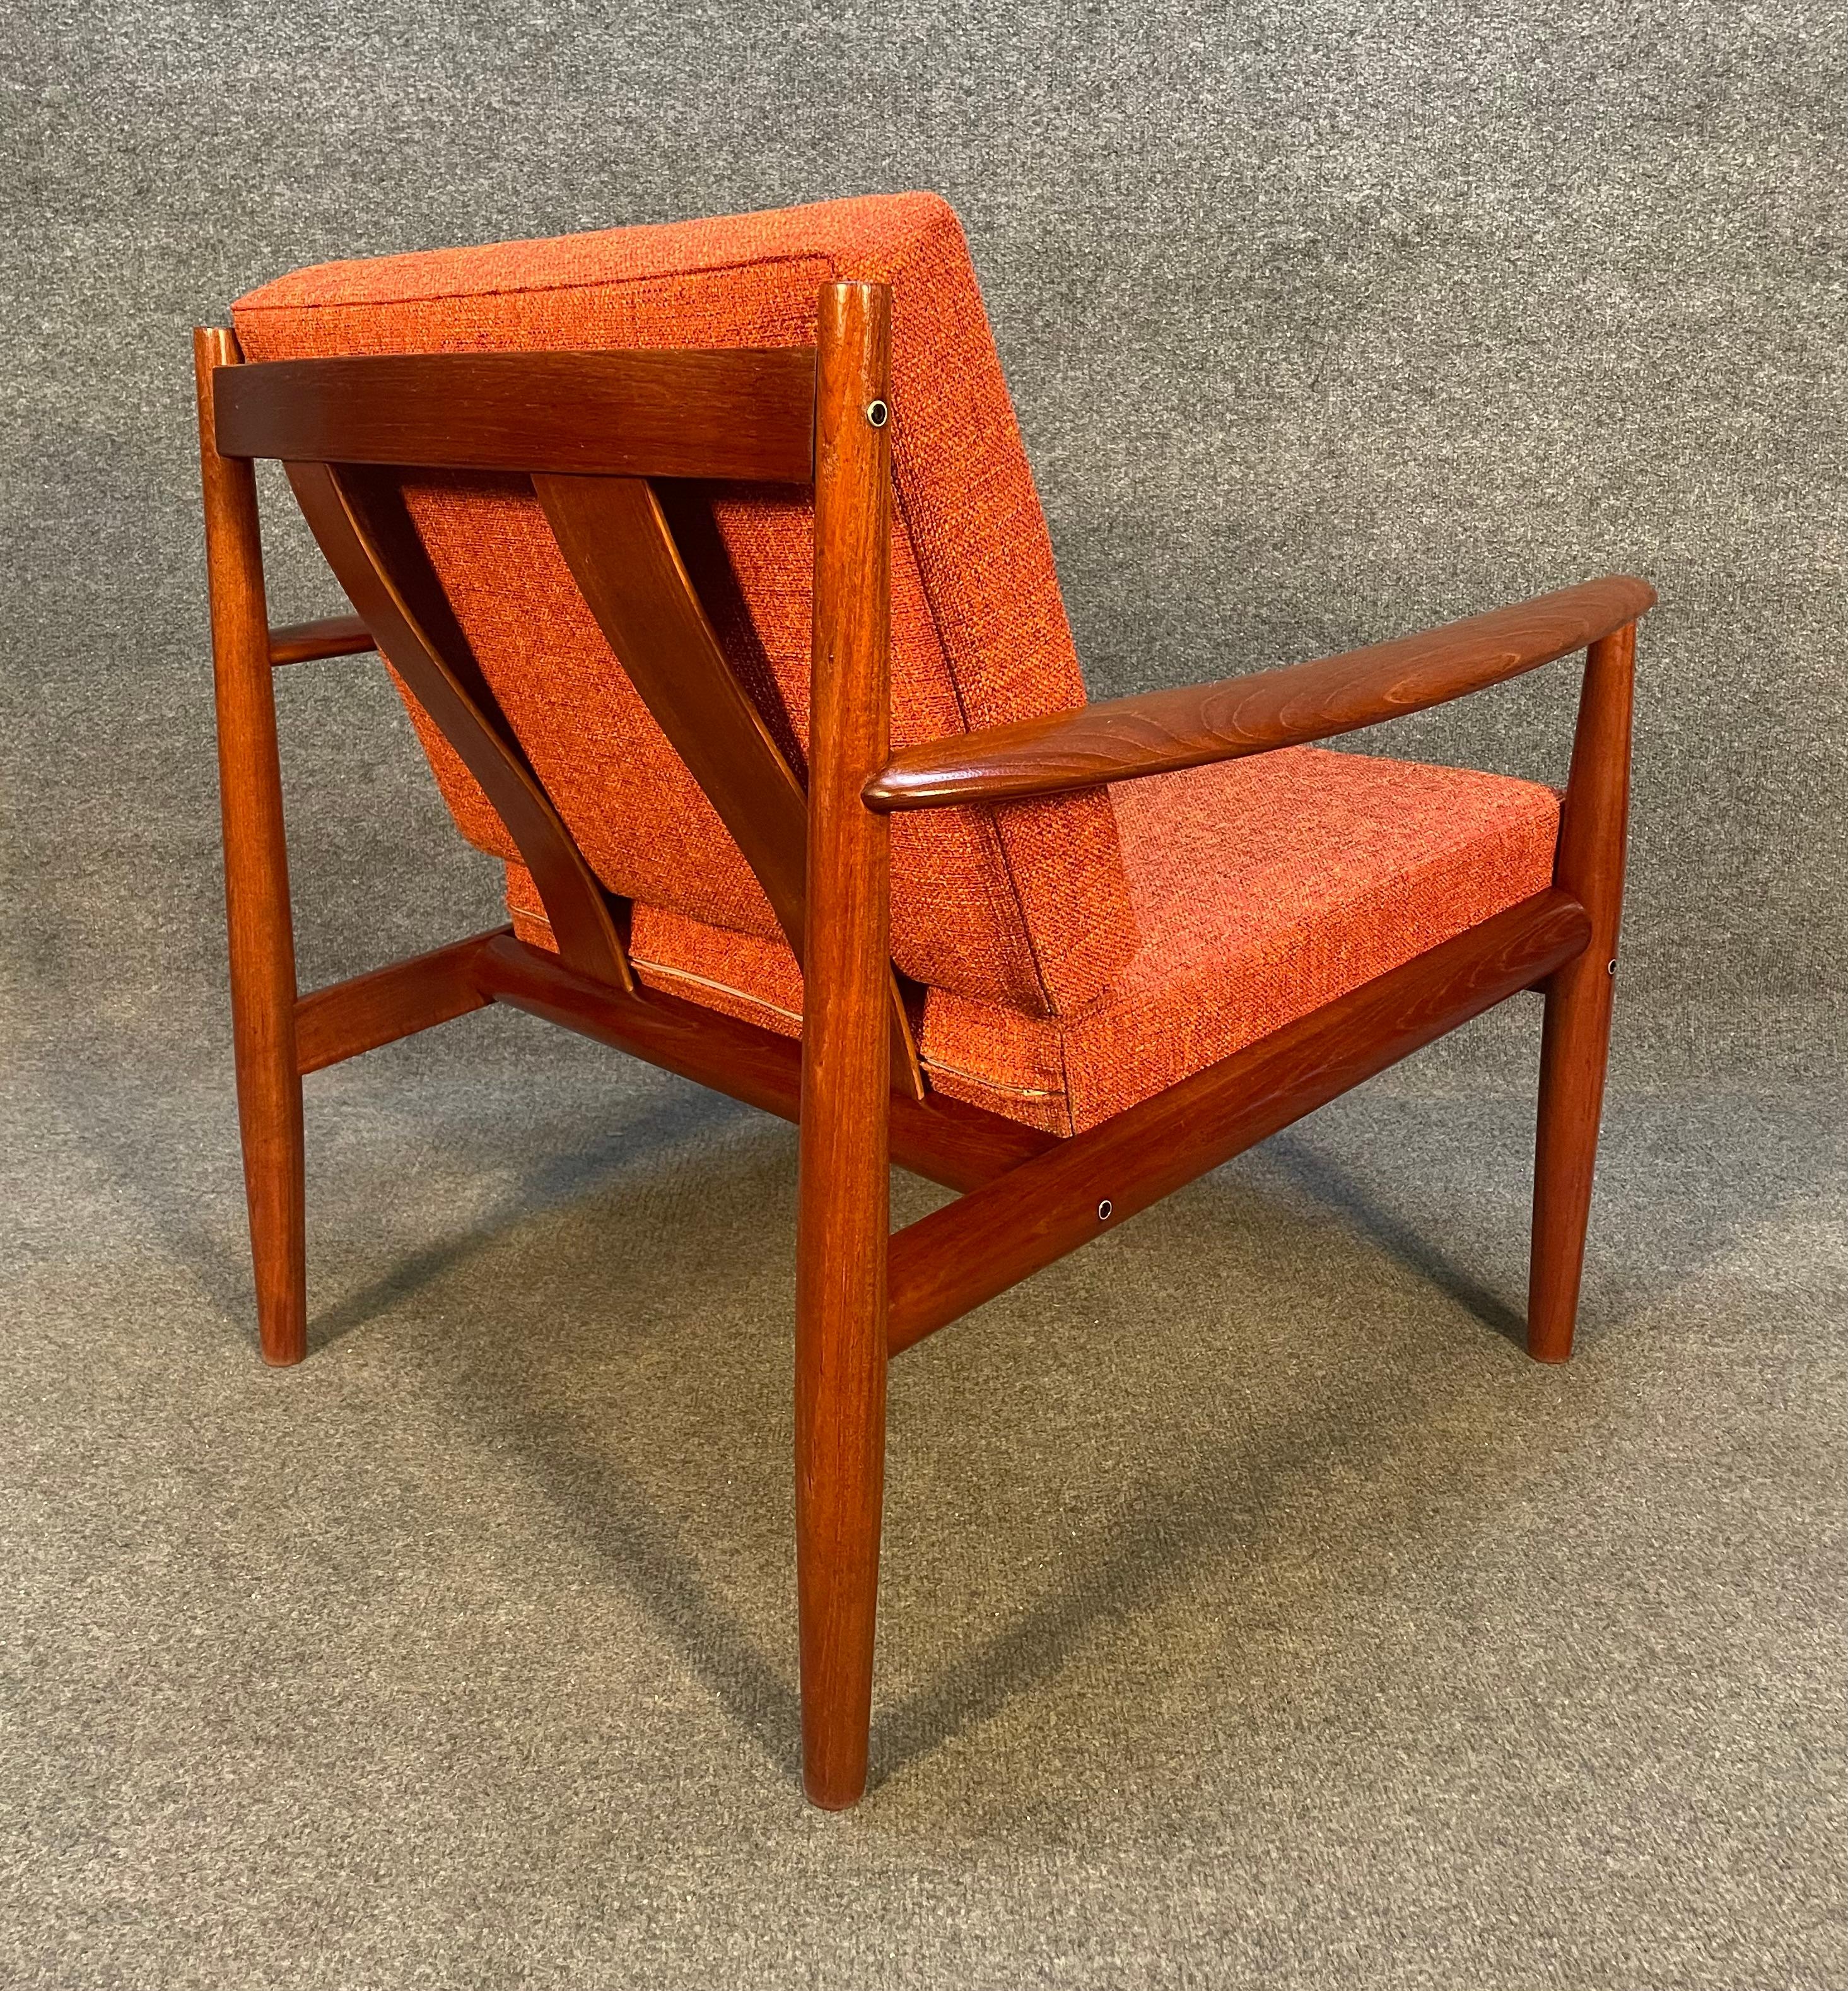 Here is a beautiful Scandinavian modern easy chair in solid teak designed by Grete Jalk and manufactured by France & Son in Denmark in the 1960's.
This comfortable chair, recently imported from Europe to California before its refinishing, features